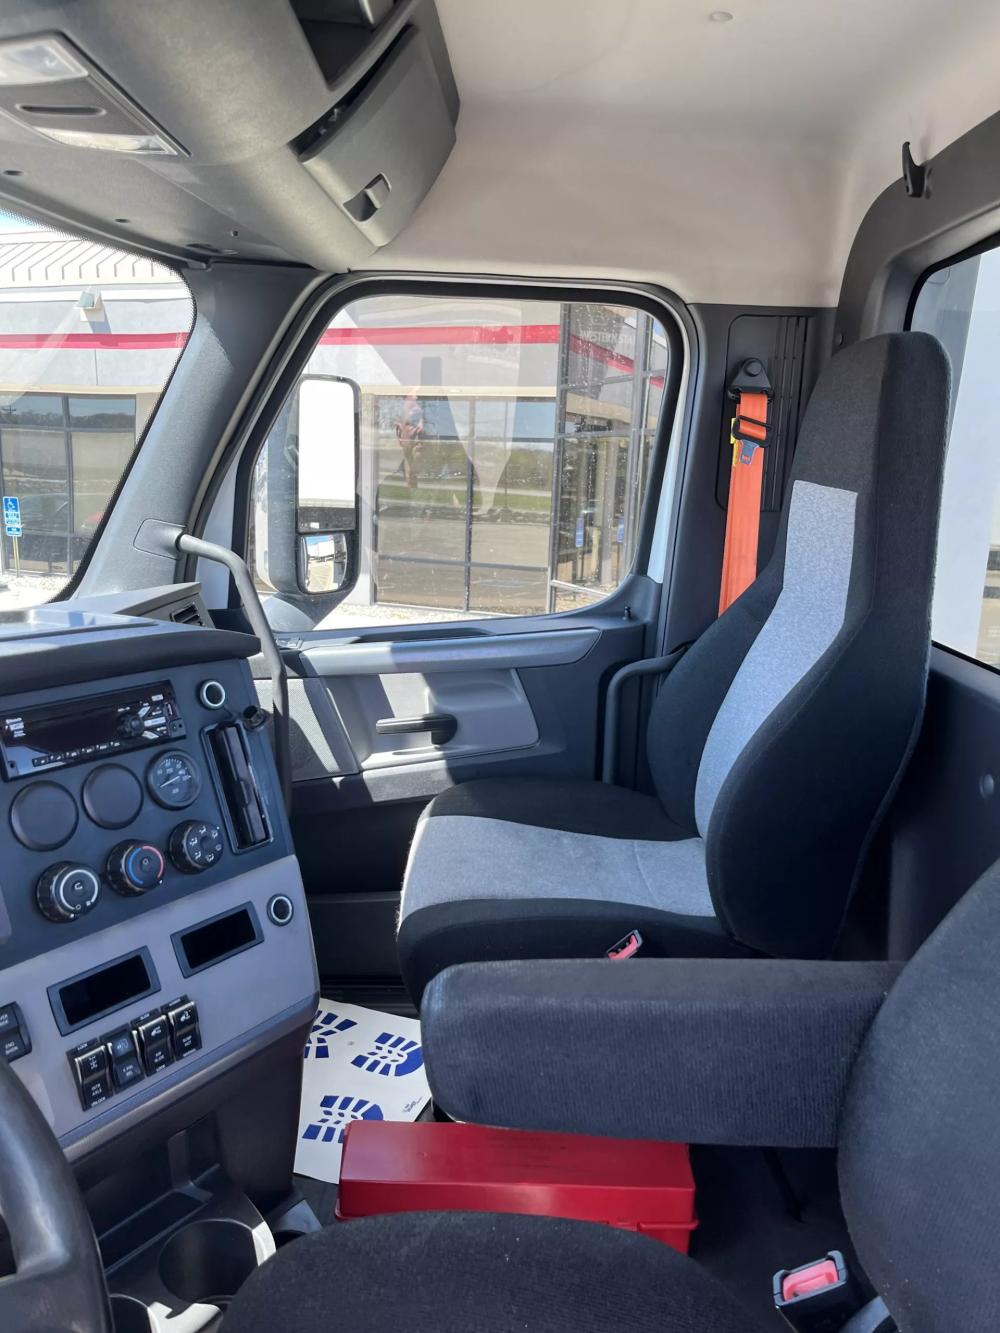 2019 Freightliner Cascadia | Photo 8 of 10